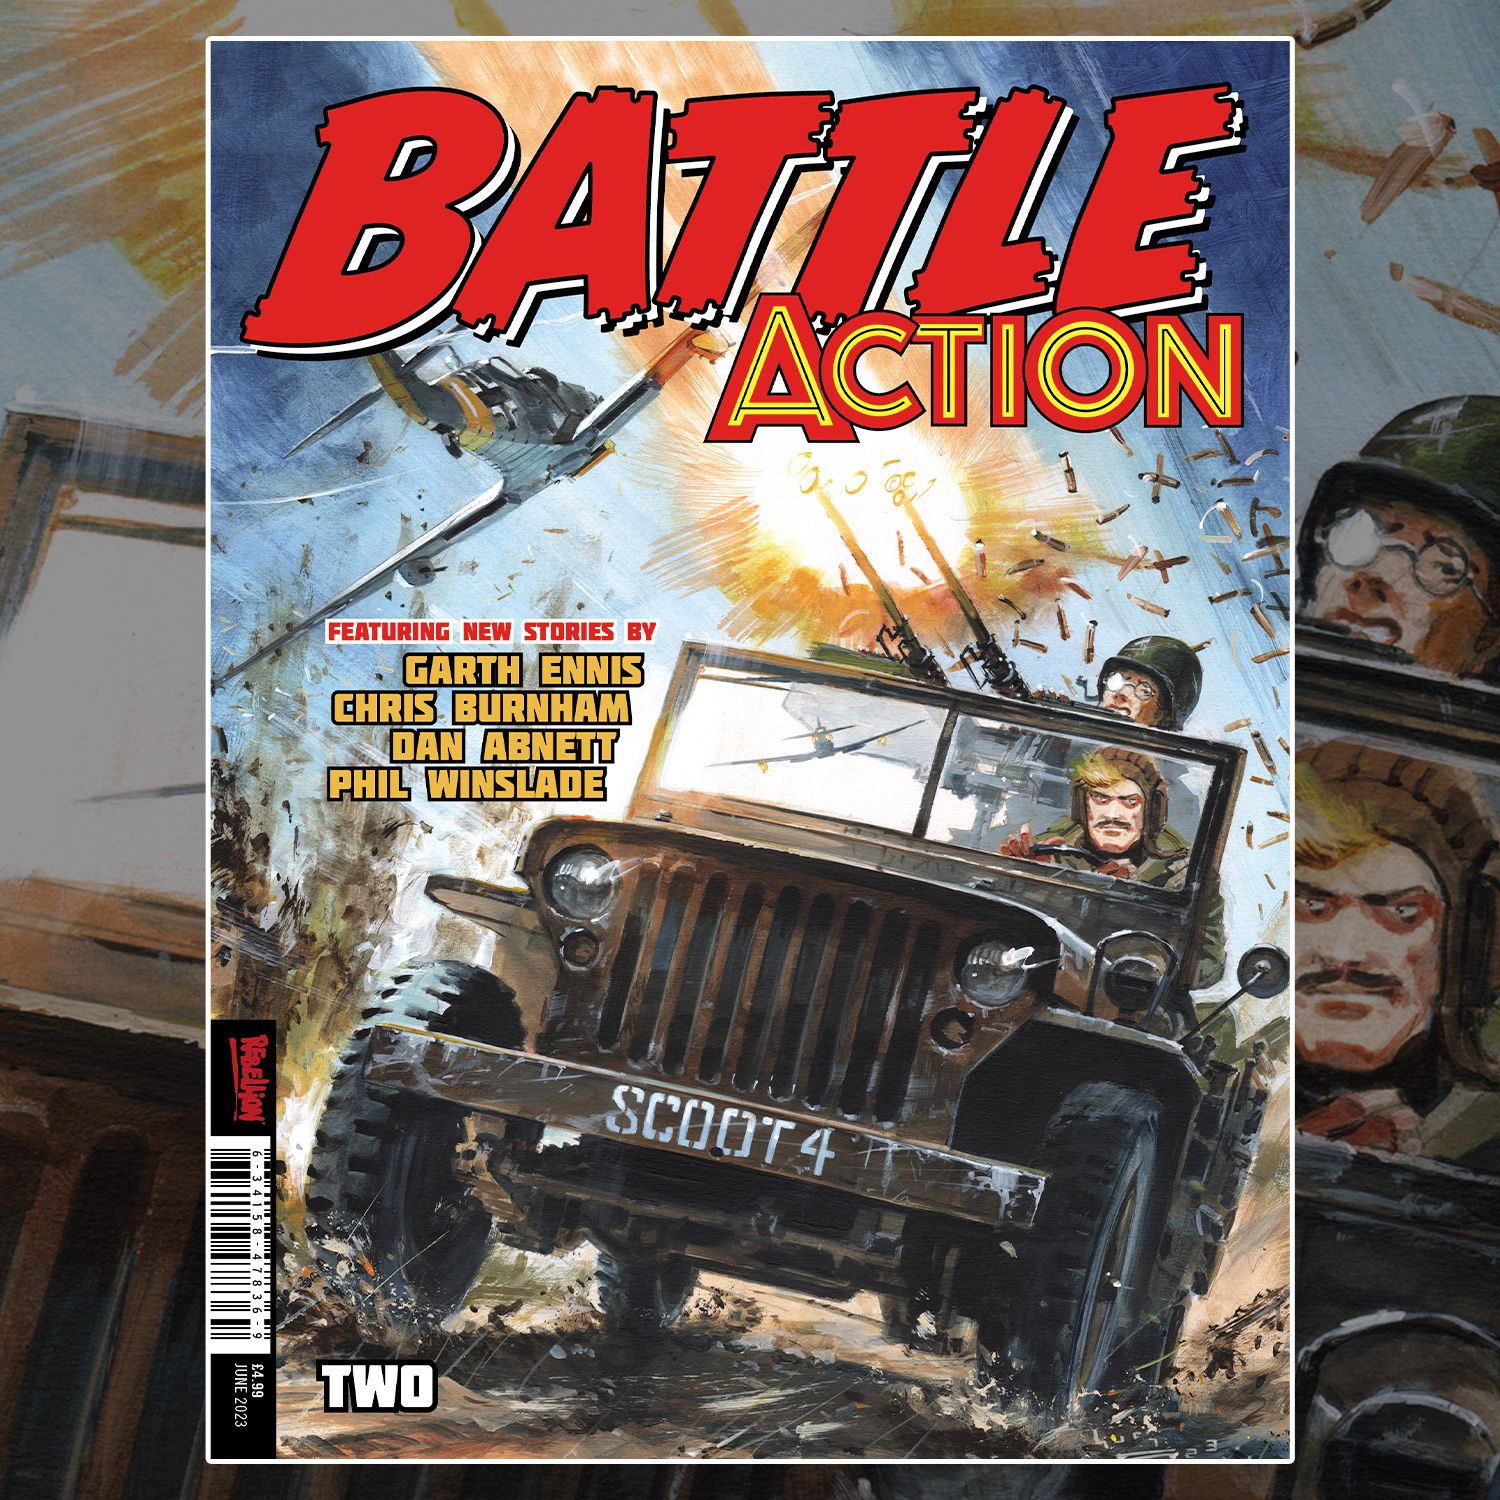 BATTLE ACTION #2 out now!